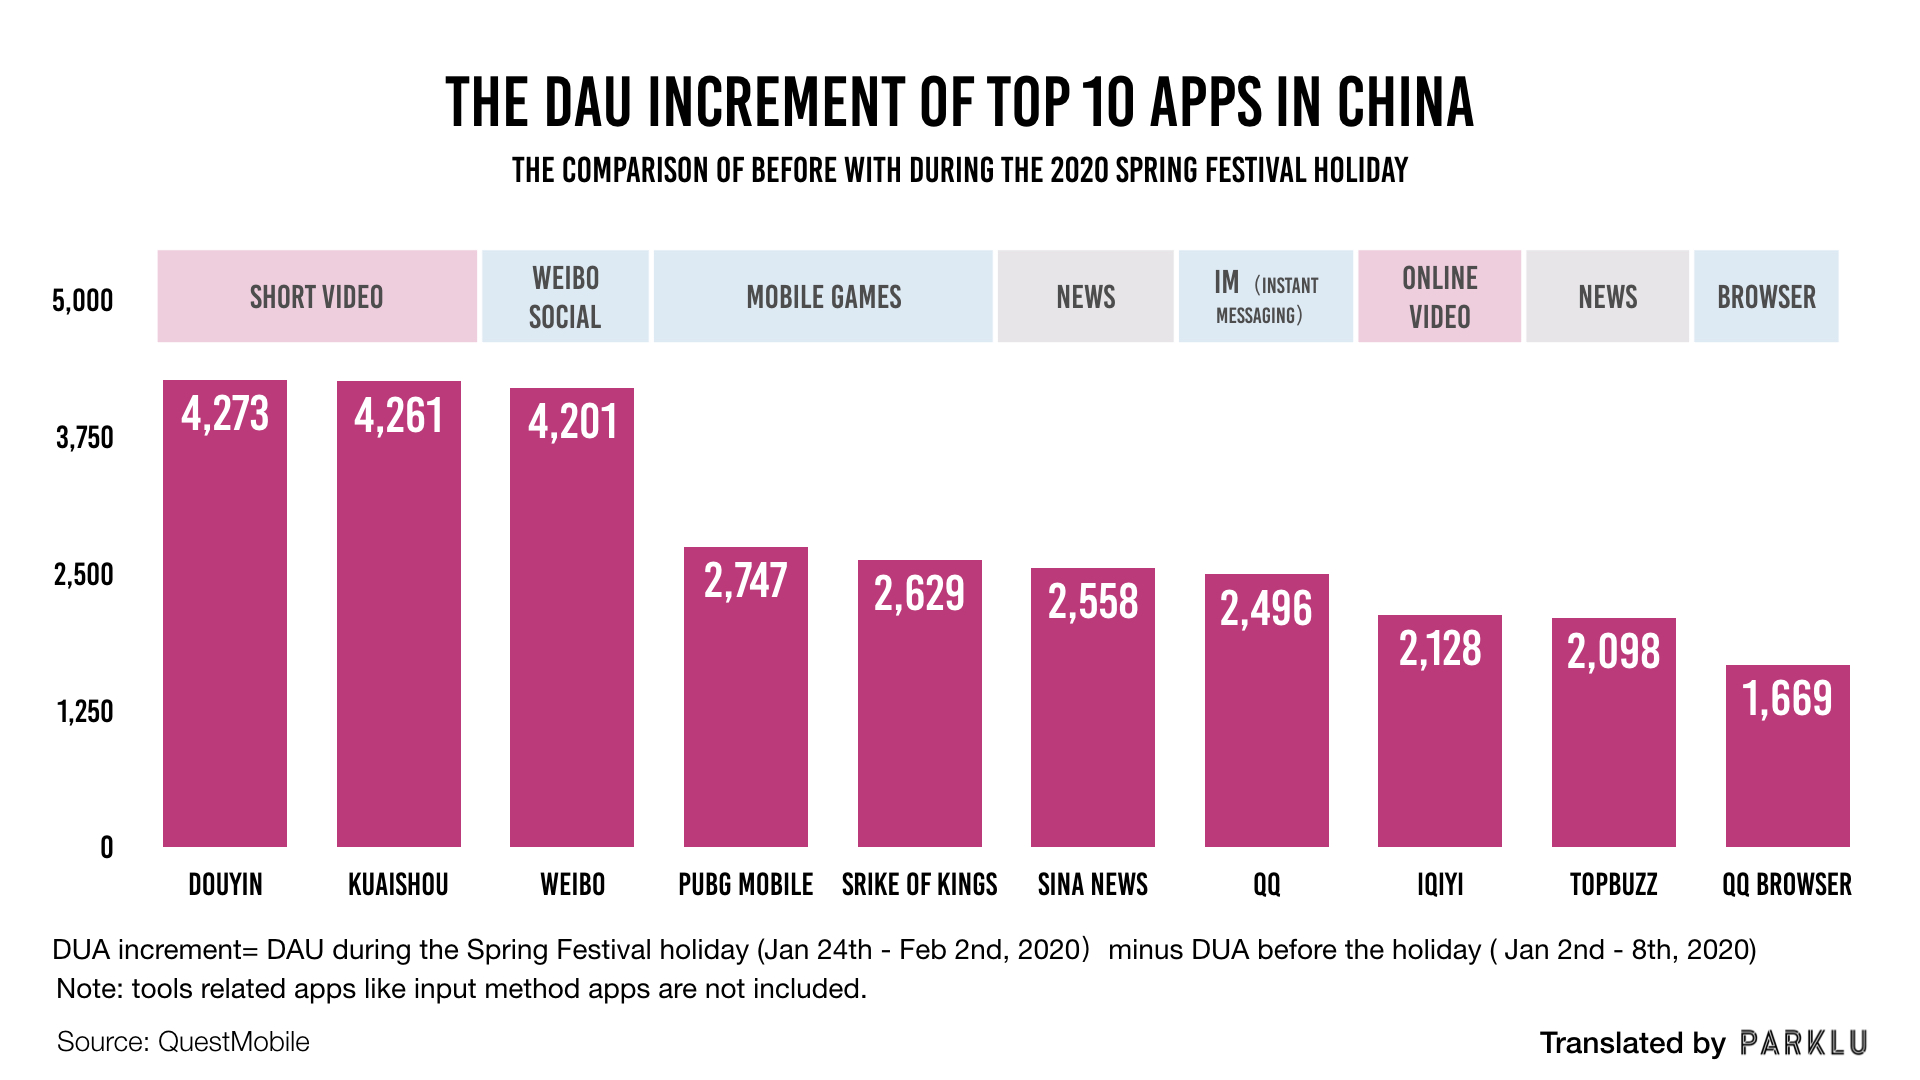 DUA increment of Top 10 apps in China during the Coronavirus